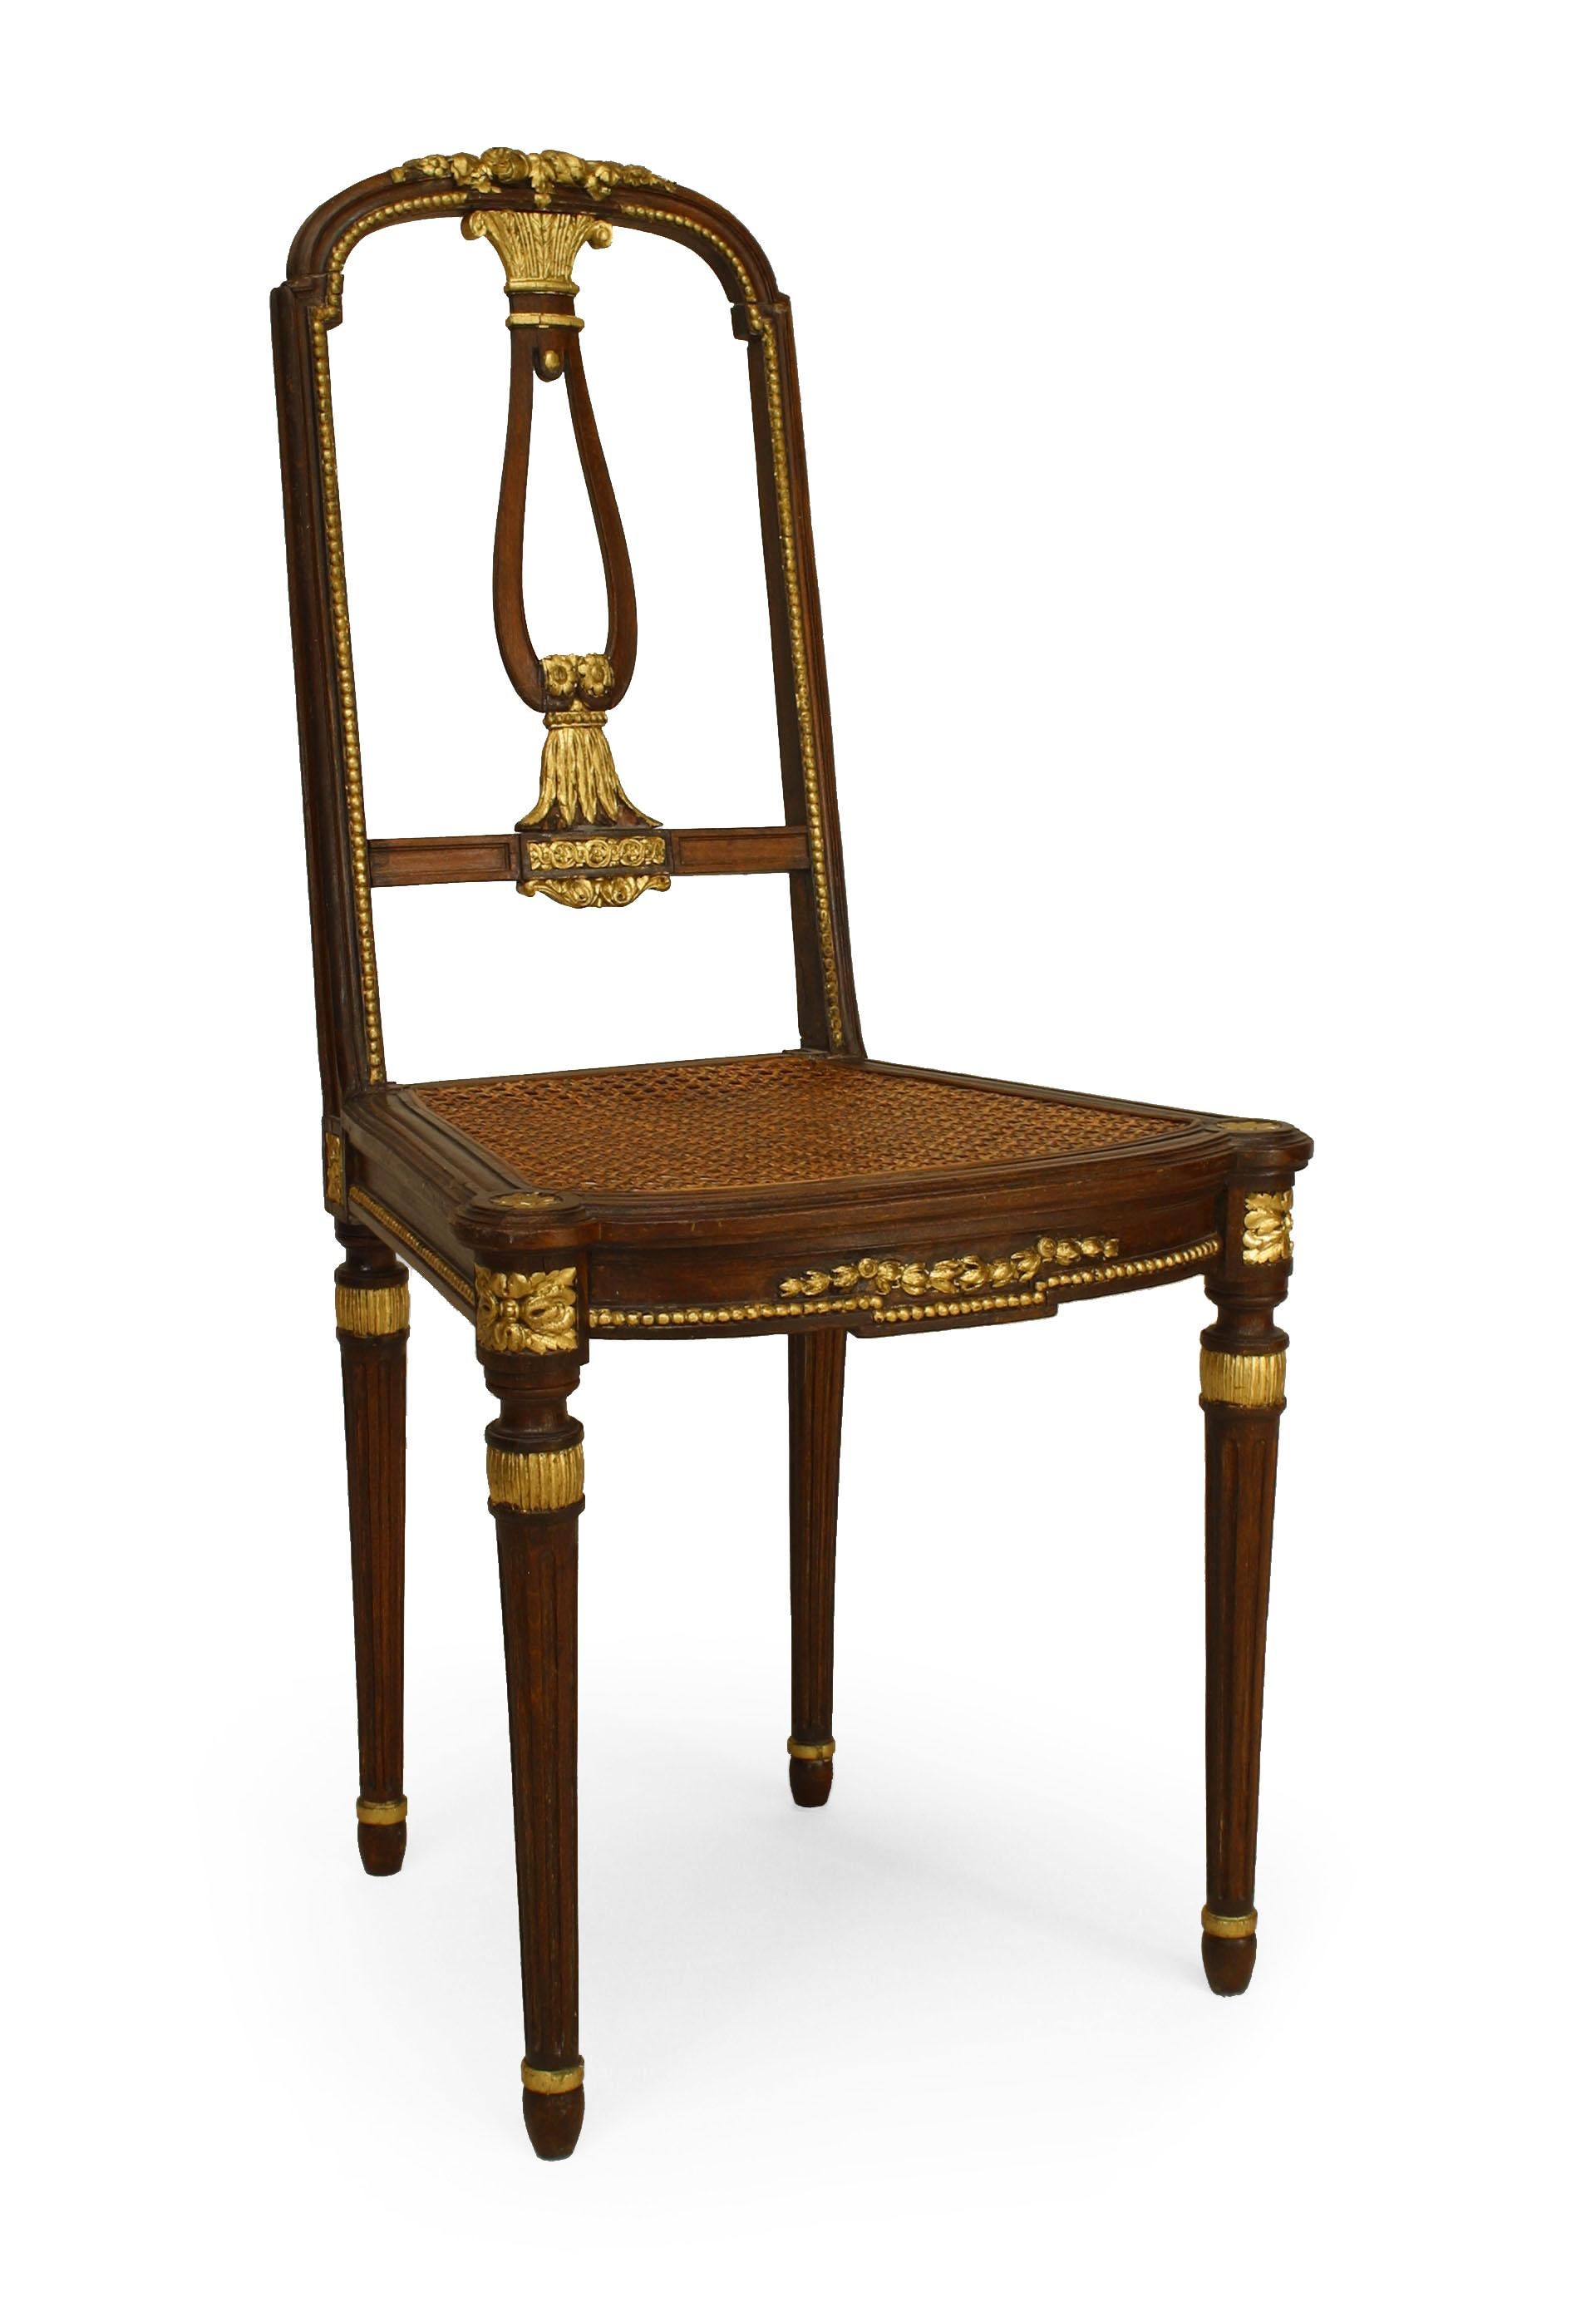 Pair of 20th century French Louis XVI-style mahogany side chairs with gilt trim and open backs with cane seats.